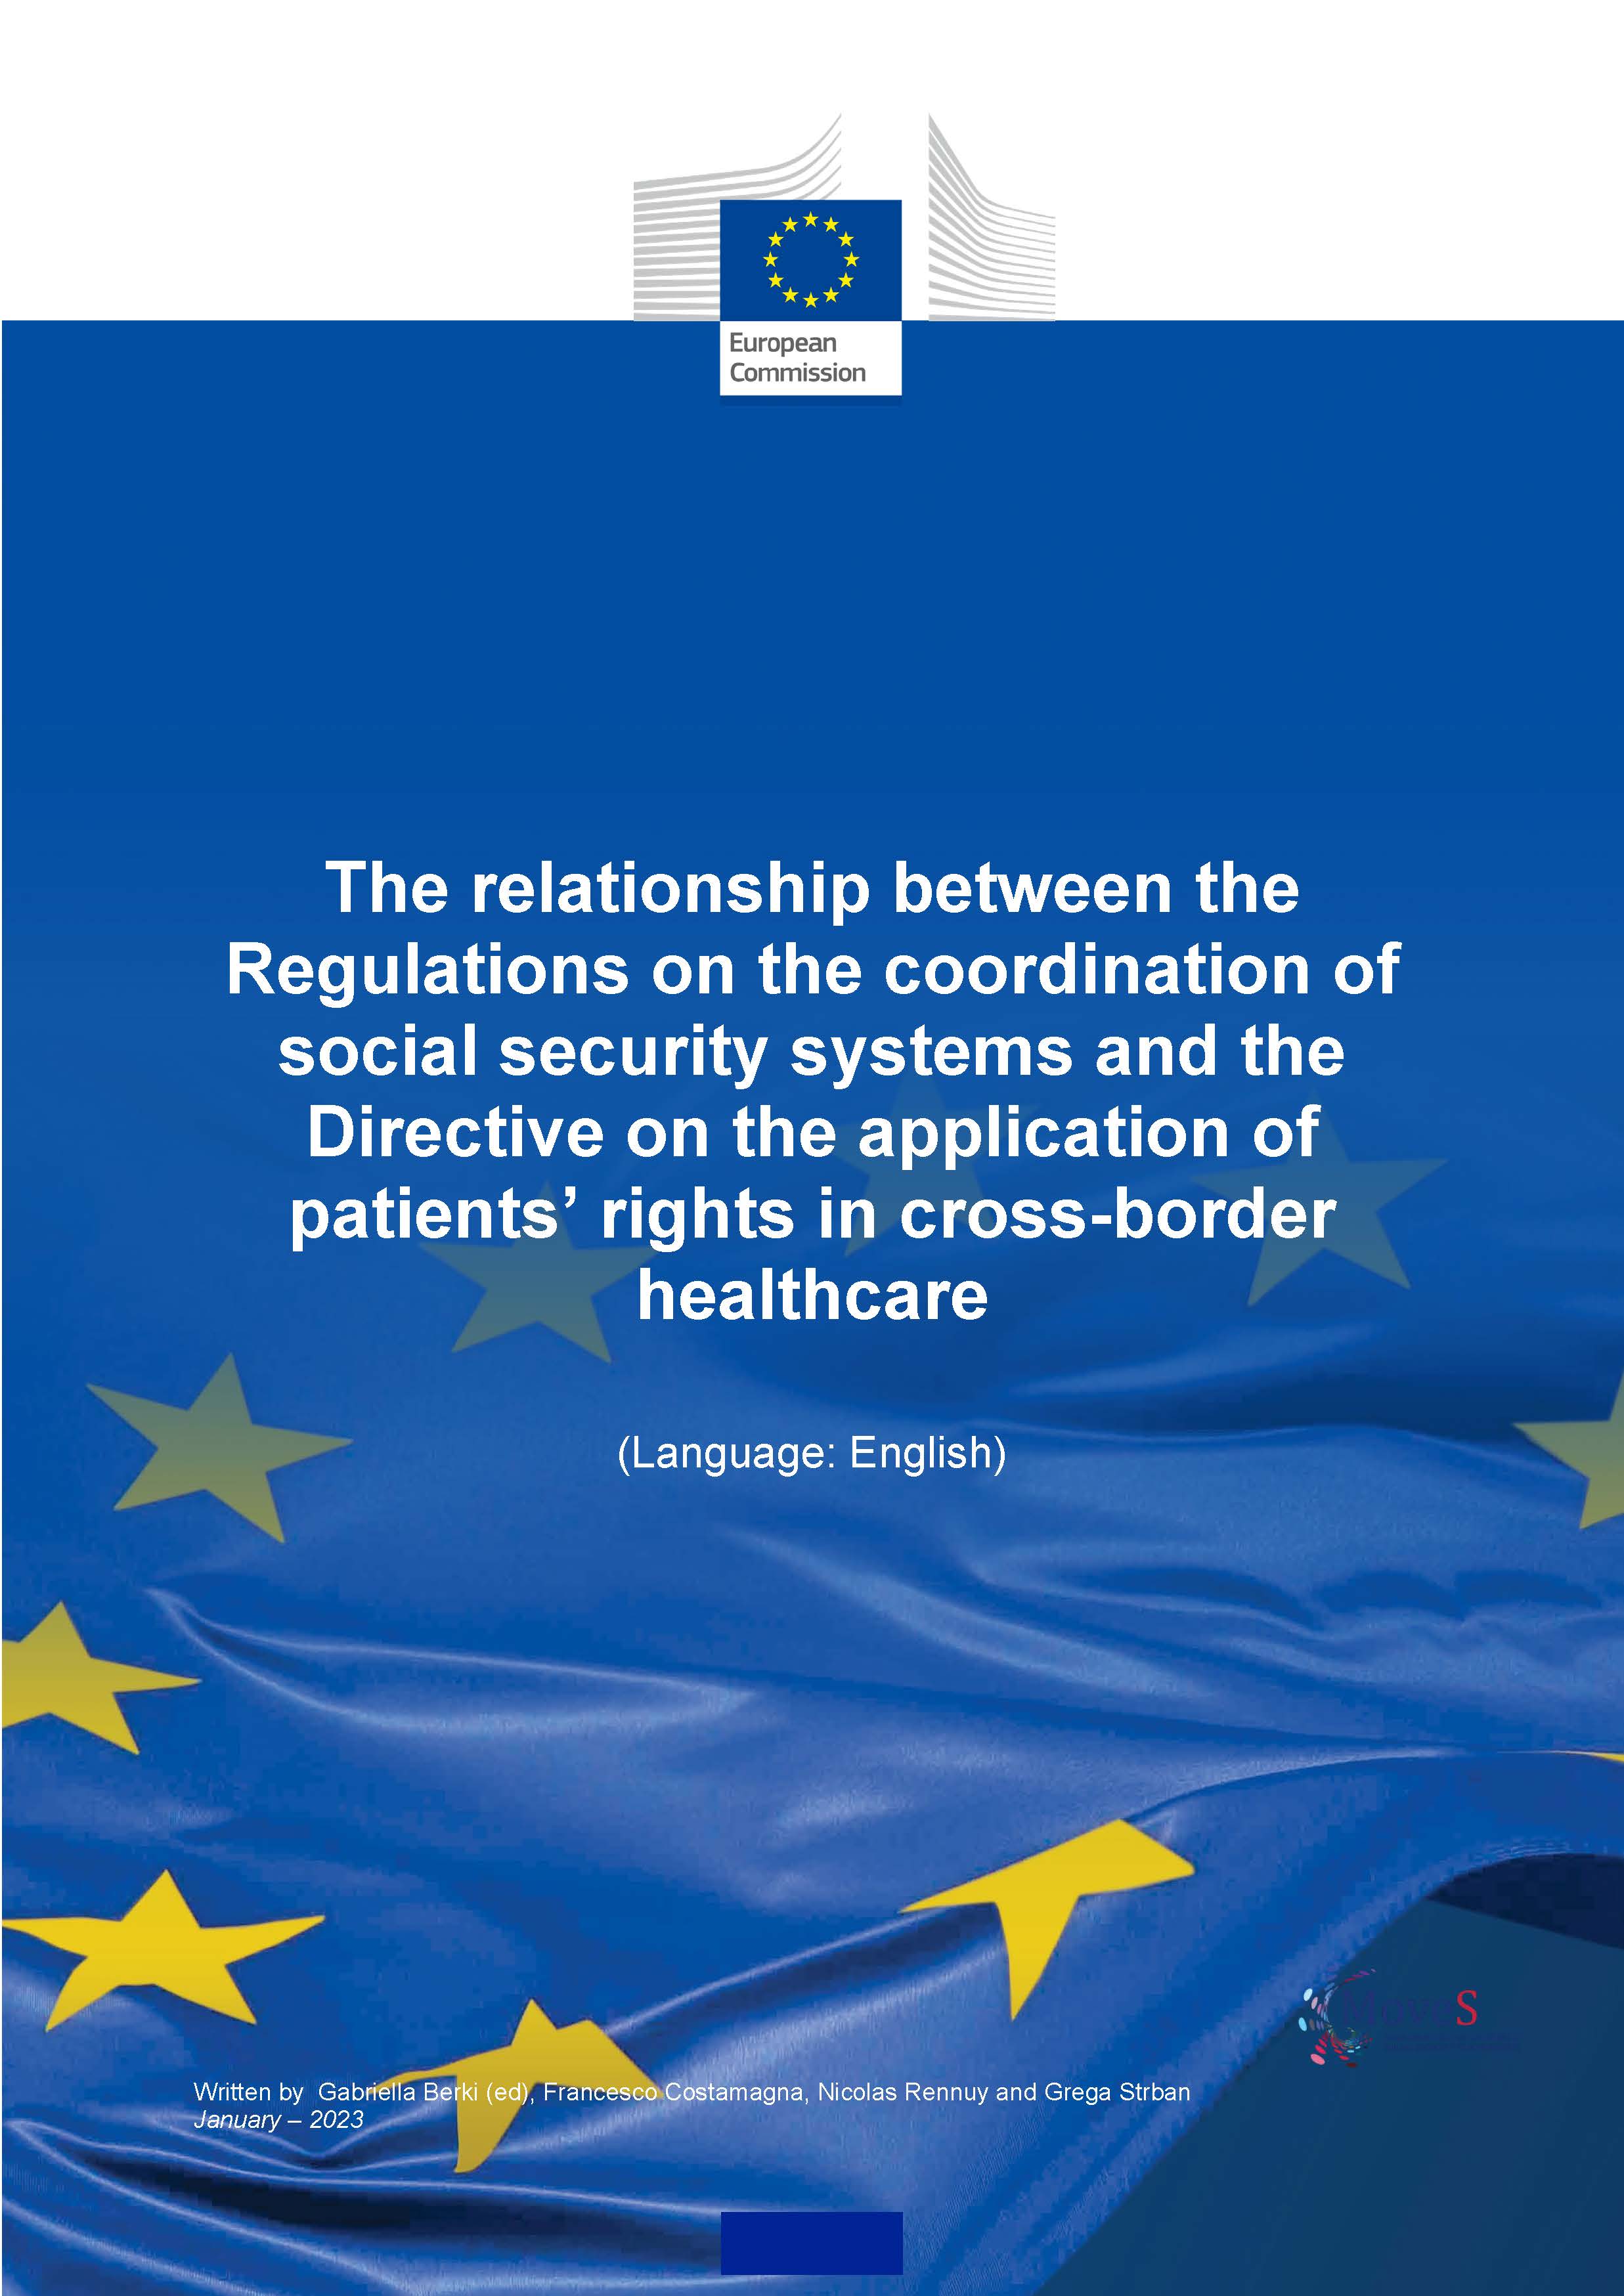 The relationship between the Regulations on the coordination of social security systems and the Directive on the application of patients’ rights in cross-border healthcare